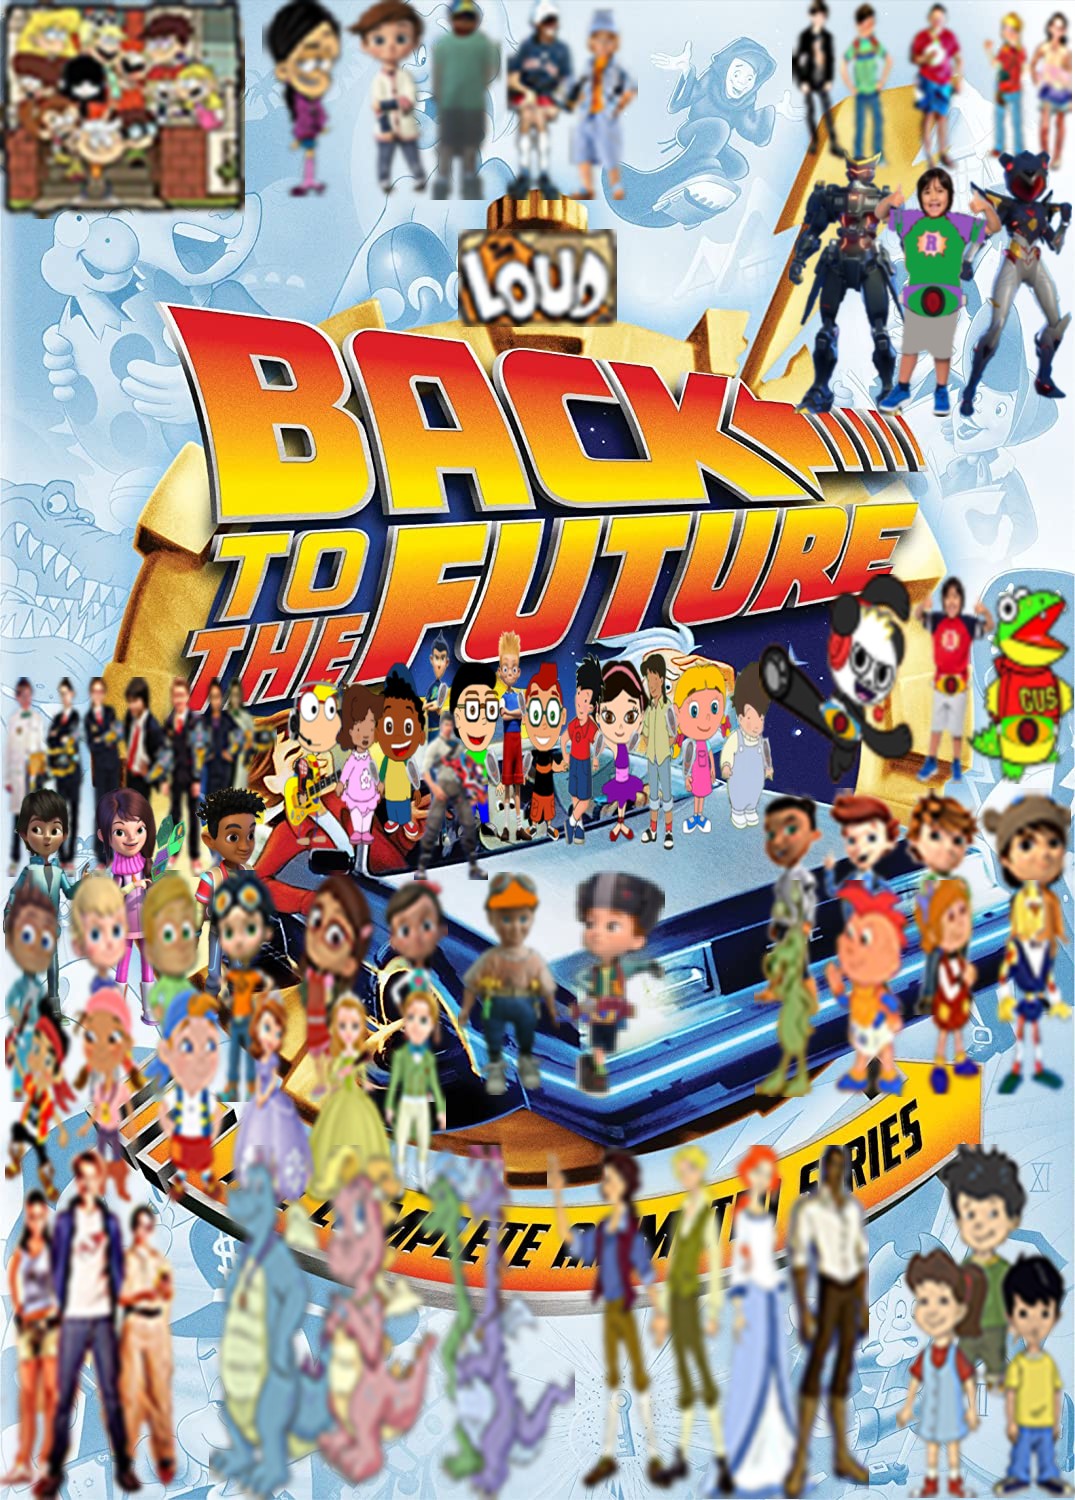 A Sneak Peek at the Cool Animations of the Back to the Future